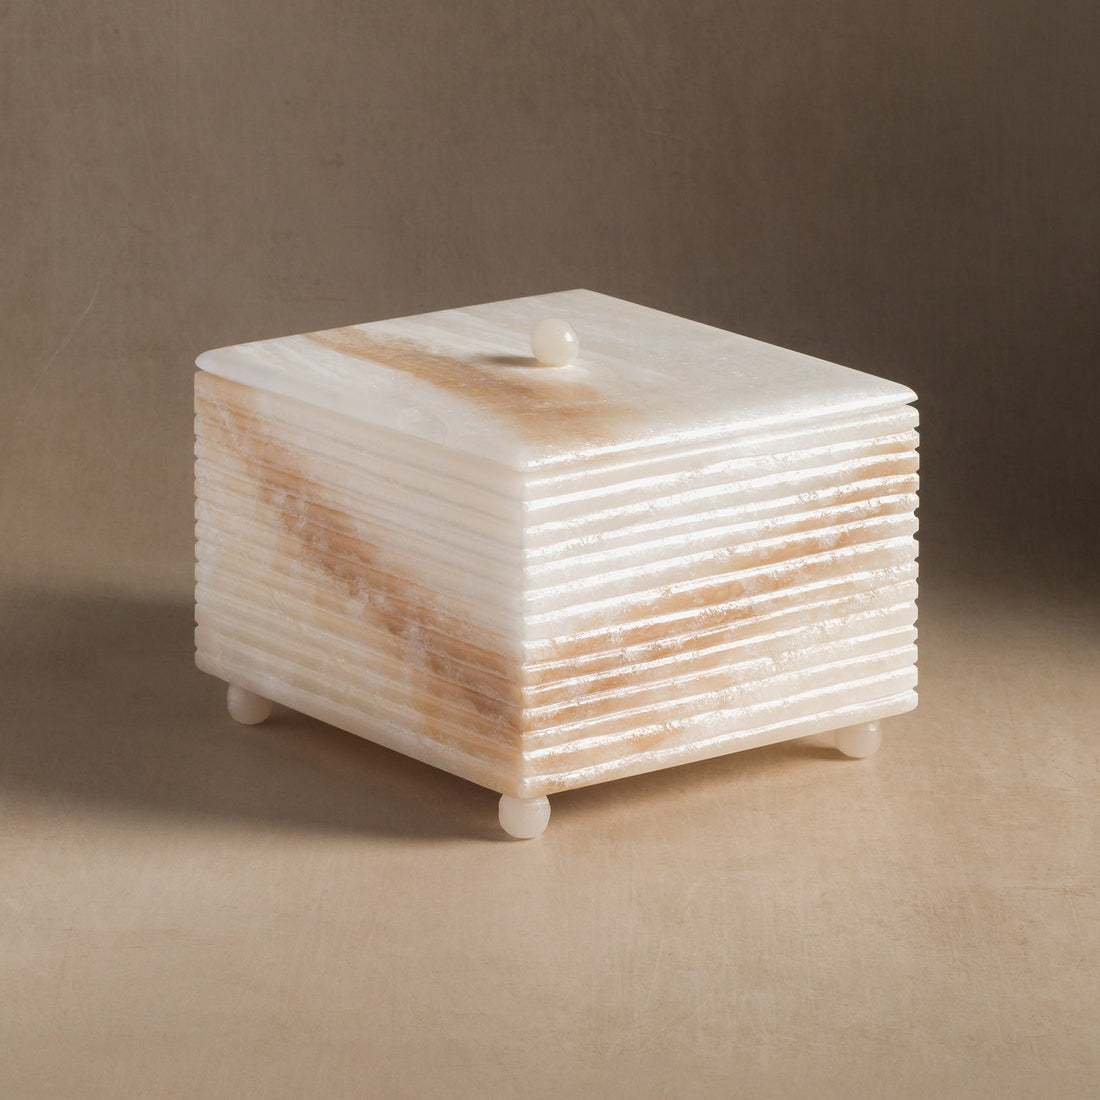 Studio H Collection Juno Ribbed Square Stone Box with Lid - Ivory Onyx